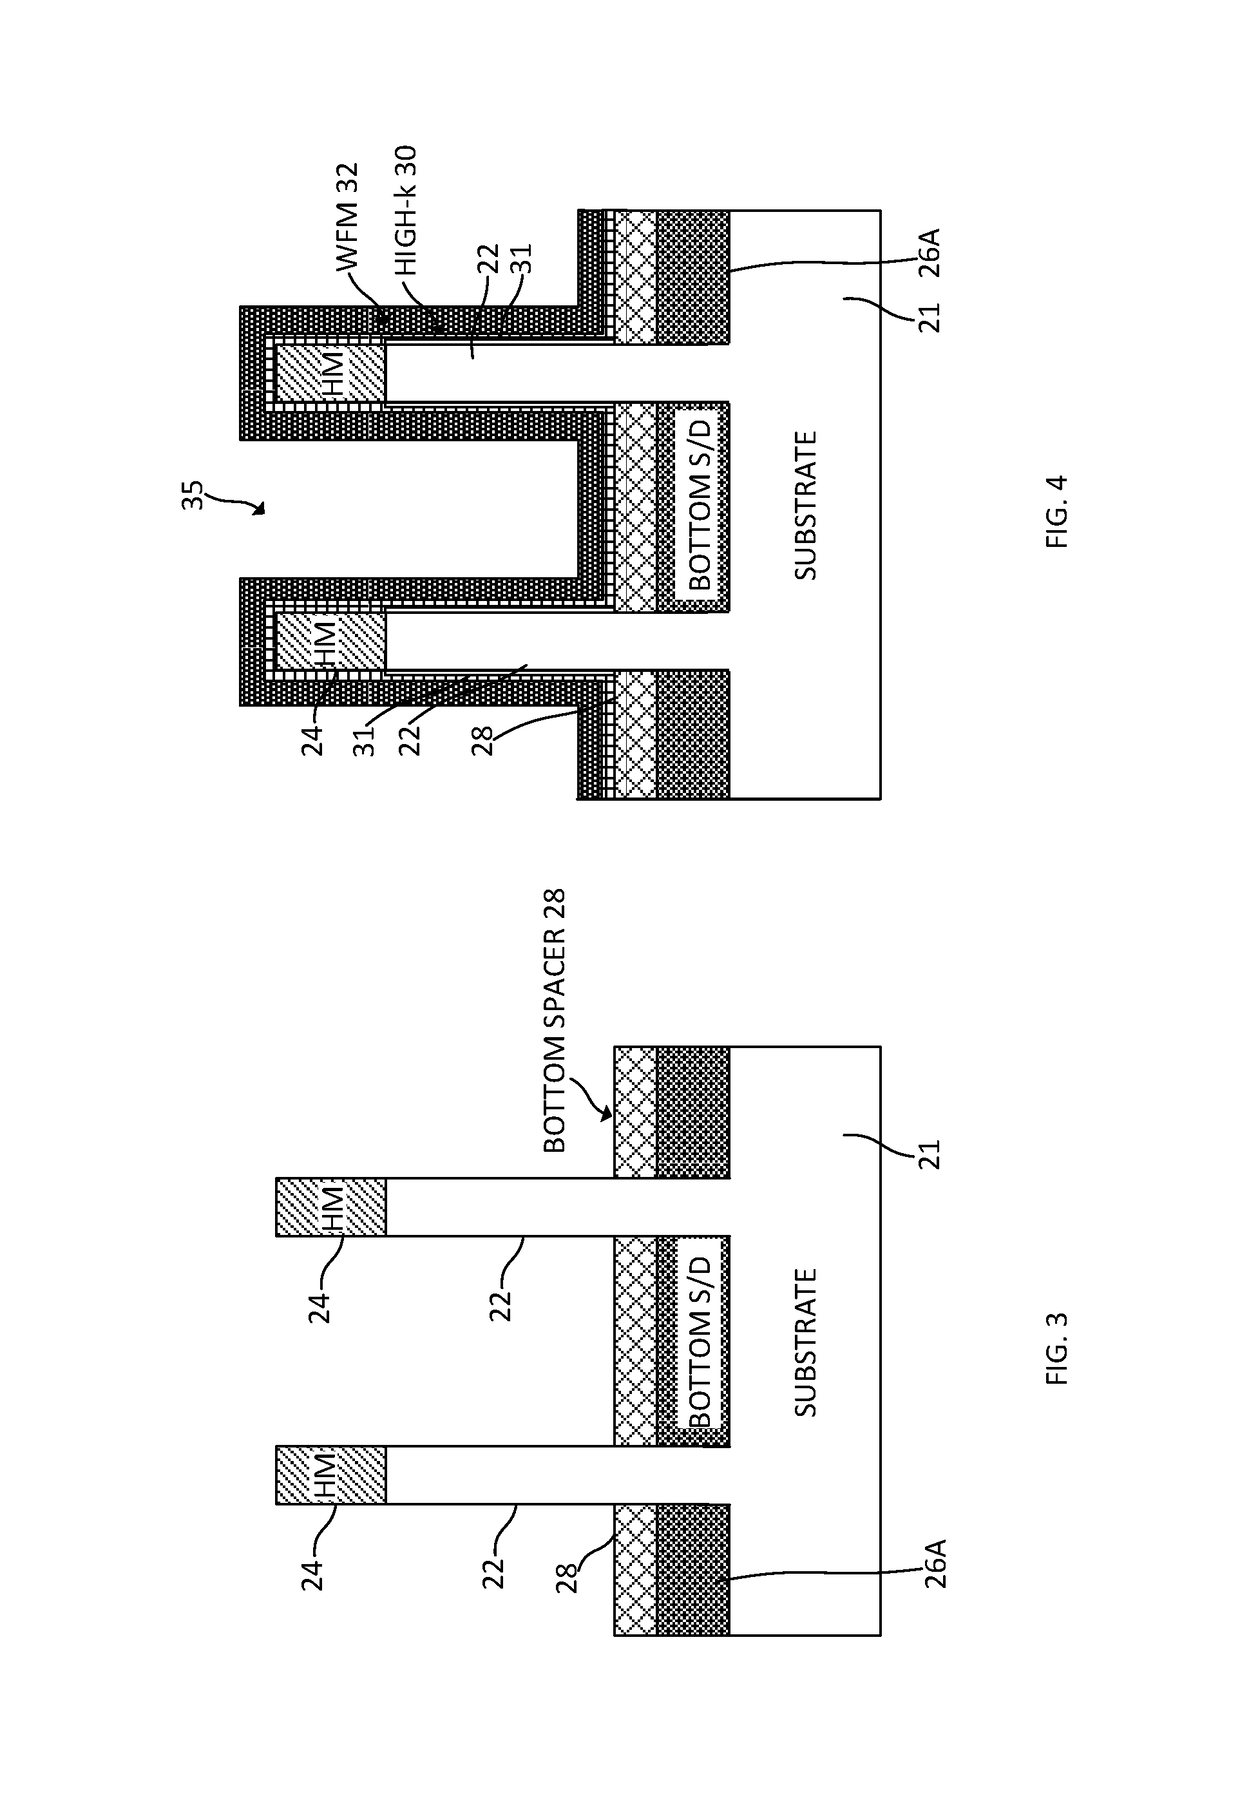 Vertical transport field-effect transistor including dual layer top spacer